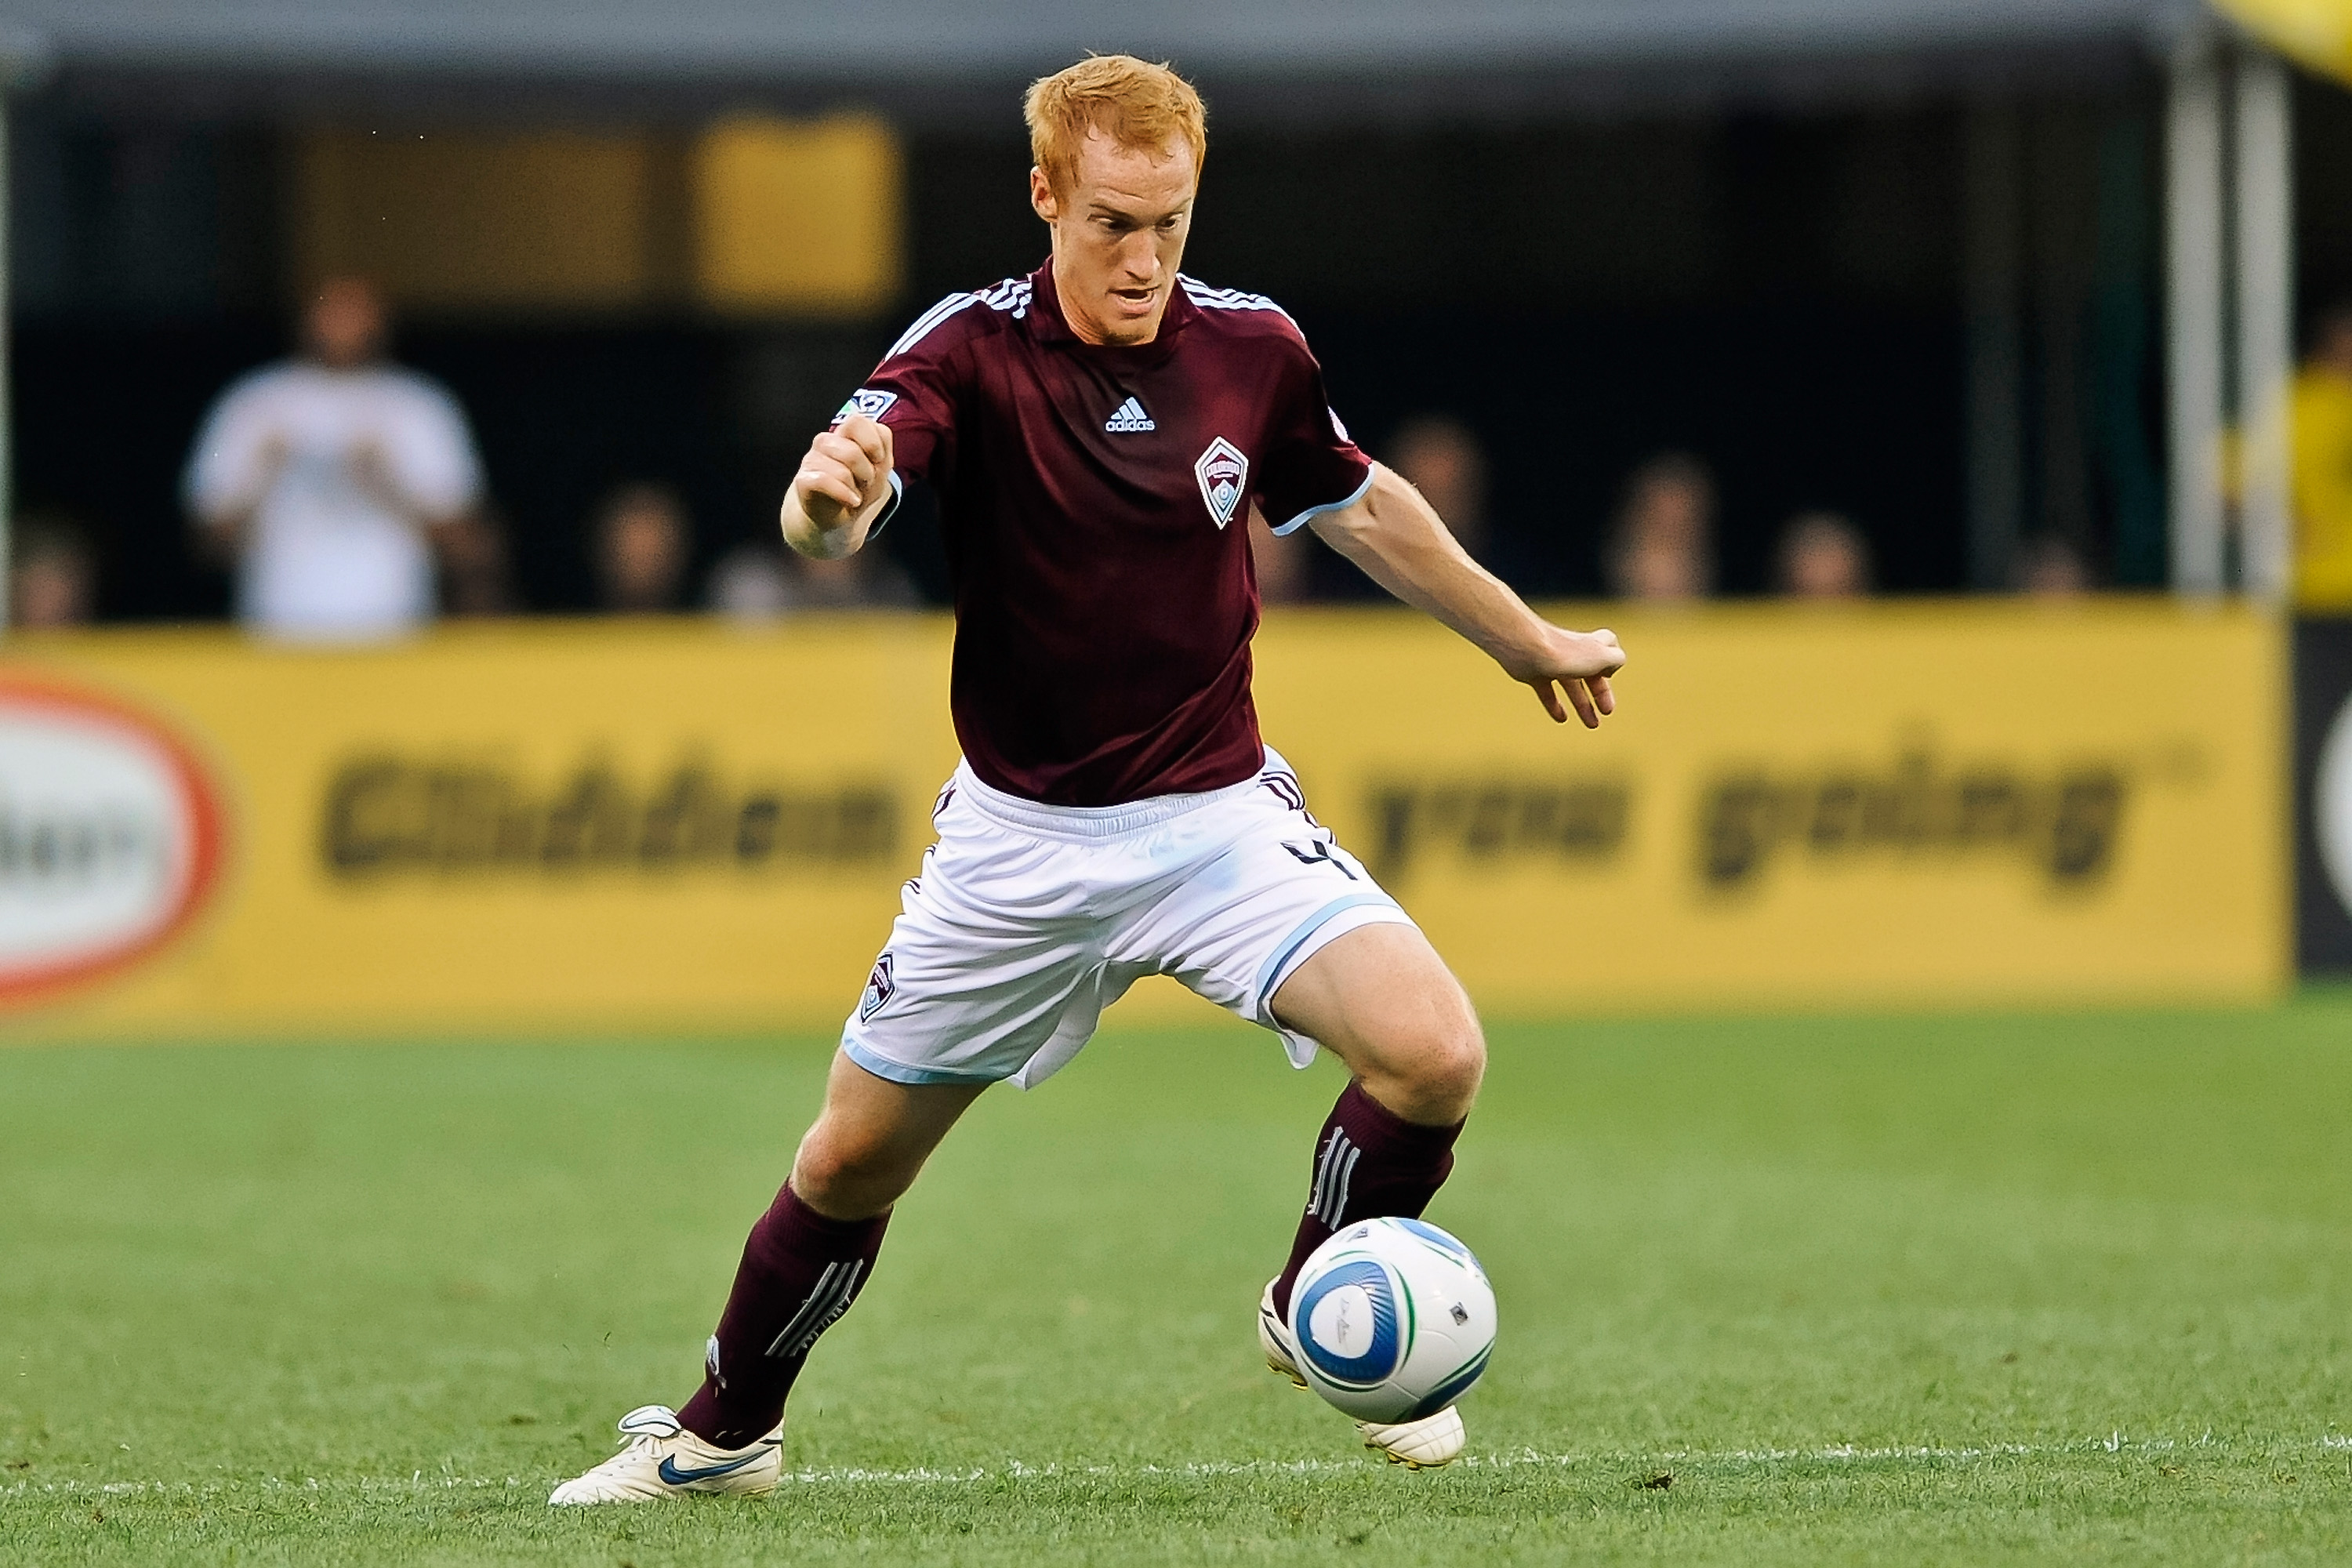 COLUMBUS, OH - AUGUST 21:  Jeff Larentowicz #4 of the Colorado Rapids controls the ball against the Columbus Crew on August 21, 2010 at Crew Stadium in Columbus, Ohio.  (Photo by Jamie Sabau/Getty Images)